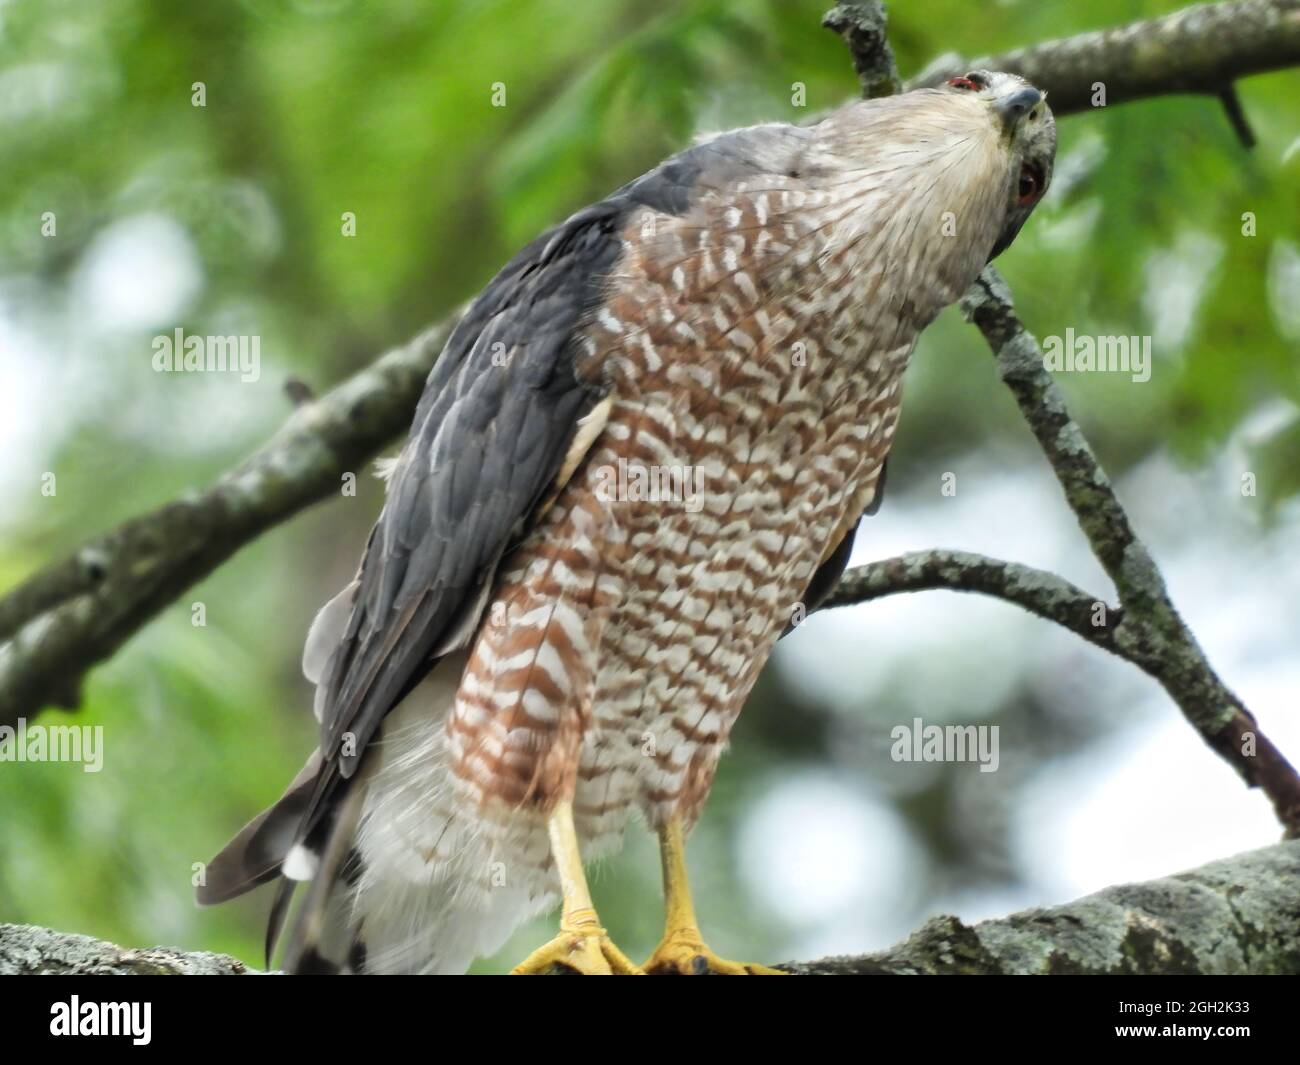 Hawk Looking Up: A Copper's hawk perched in a tree looking up into the tree Stock Photo